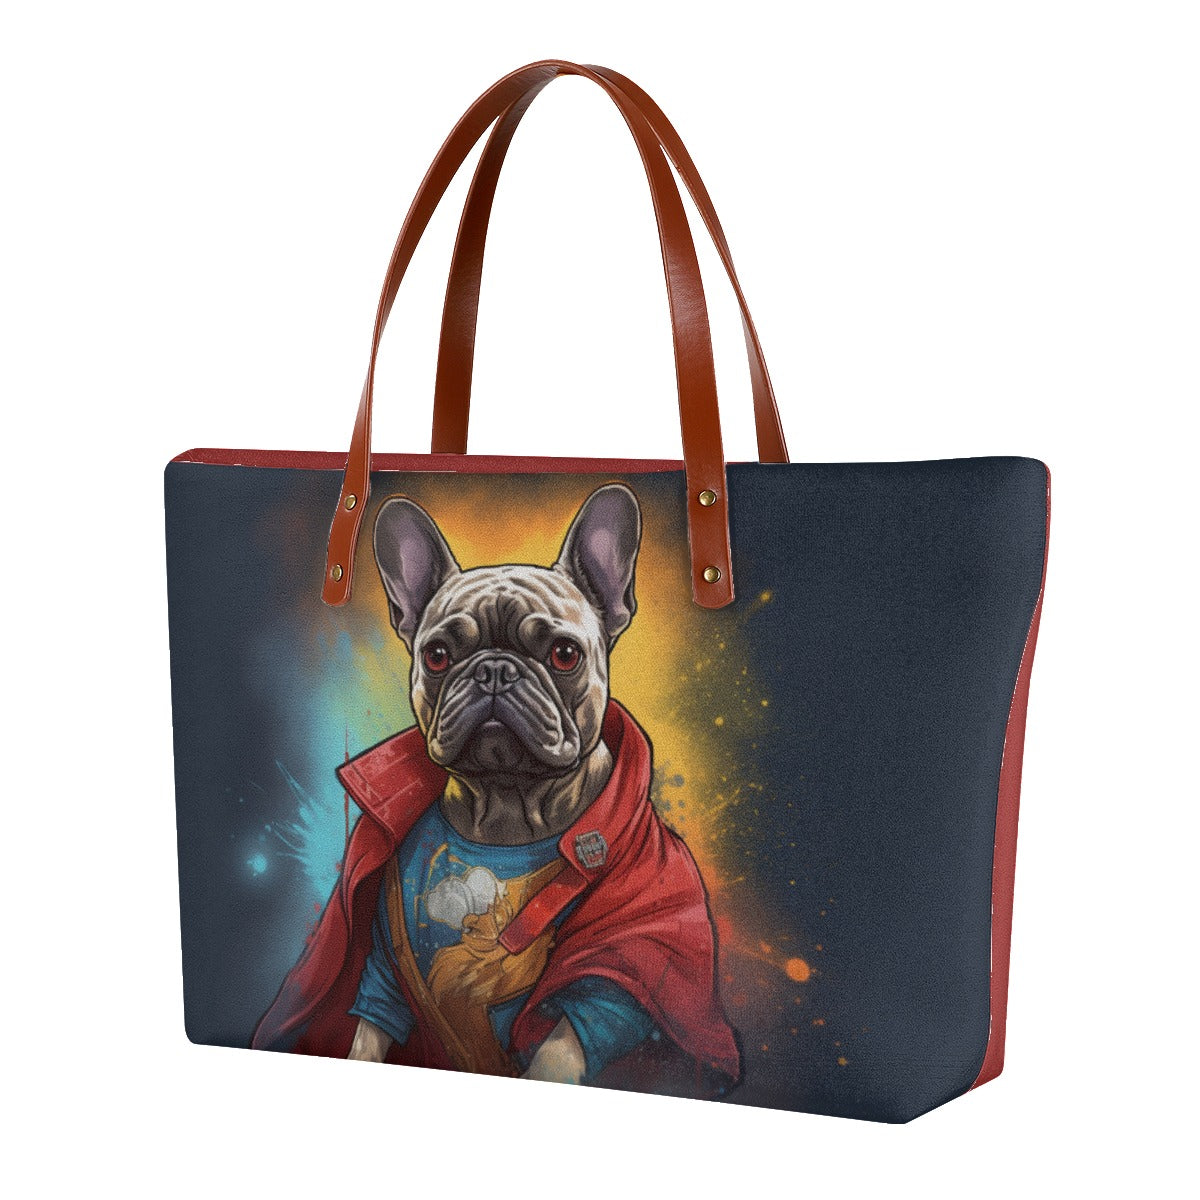 Women's Frenchie Tote Bag - Whimsical Canine Accessory